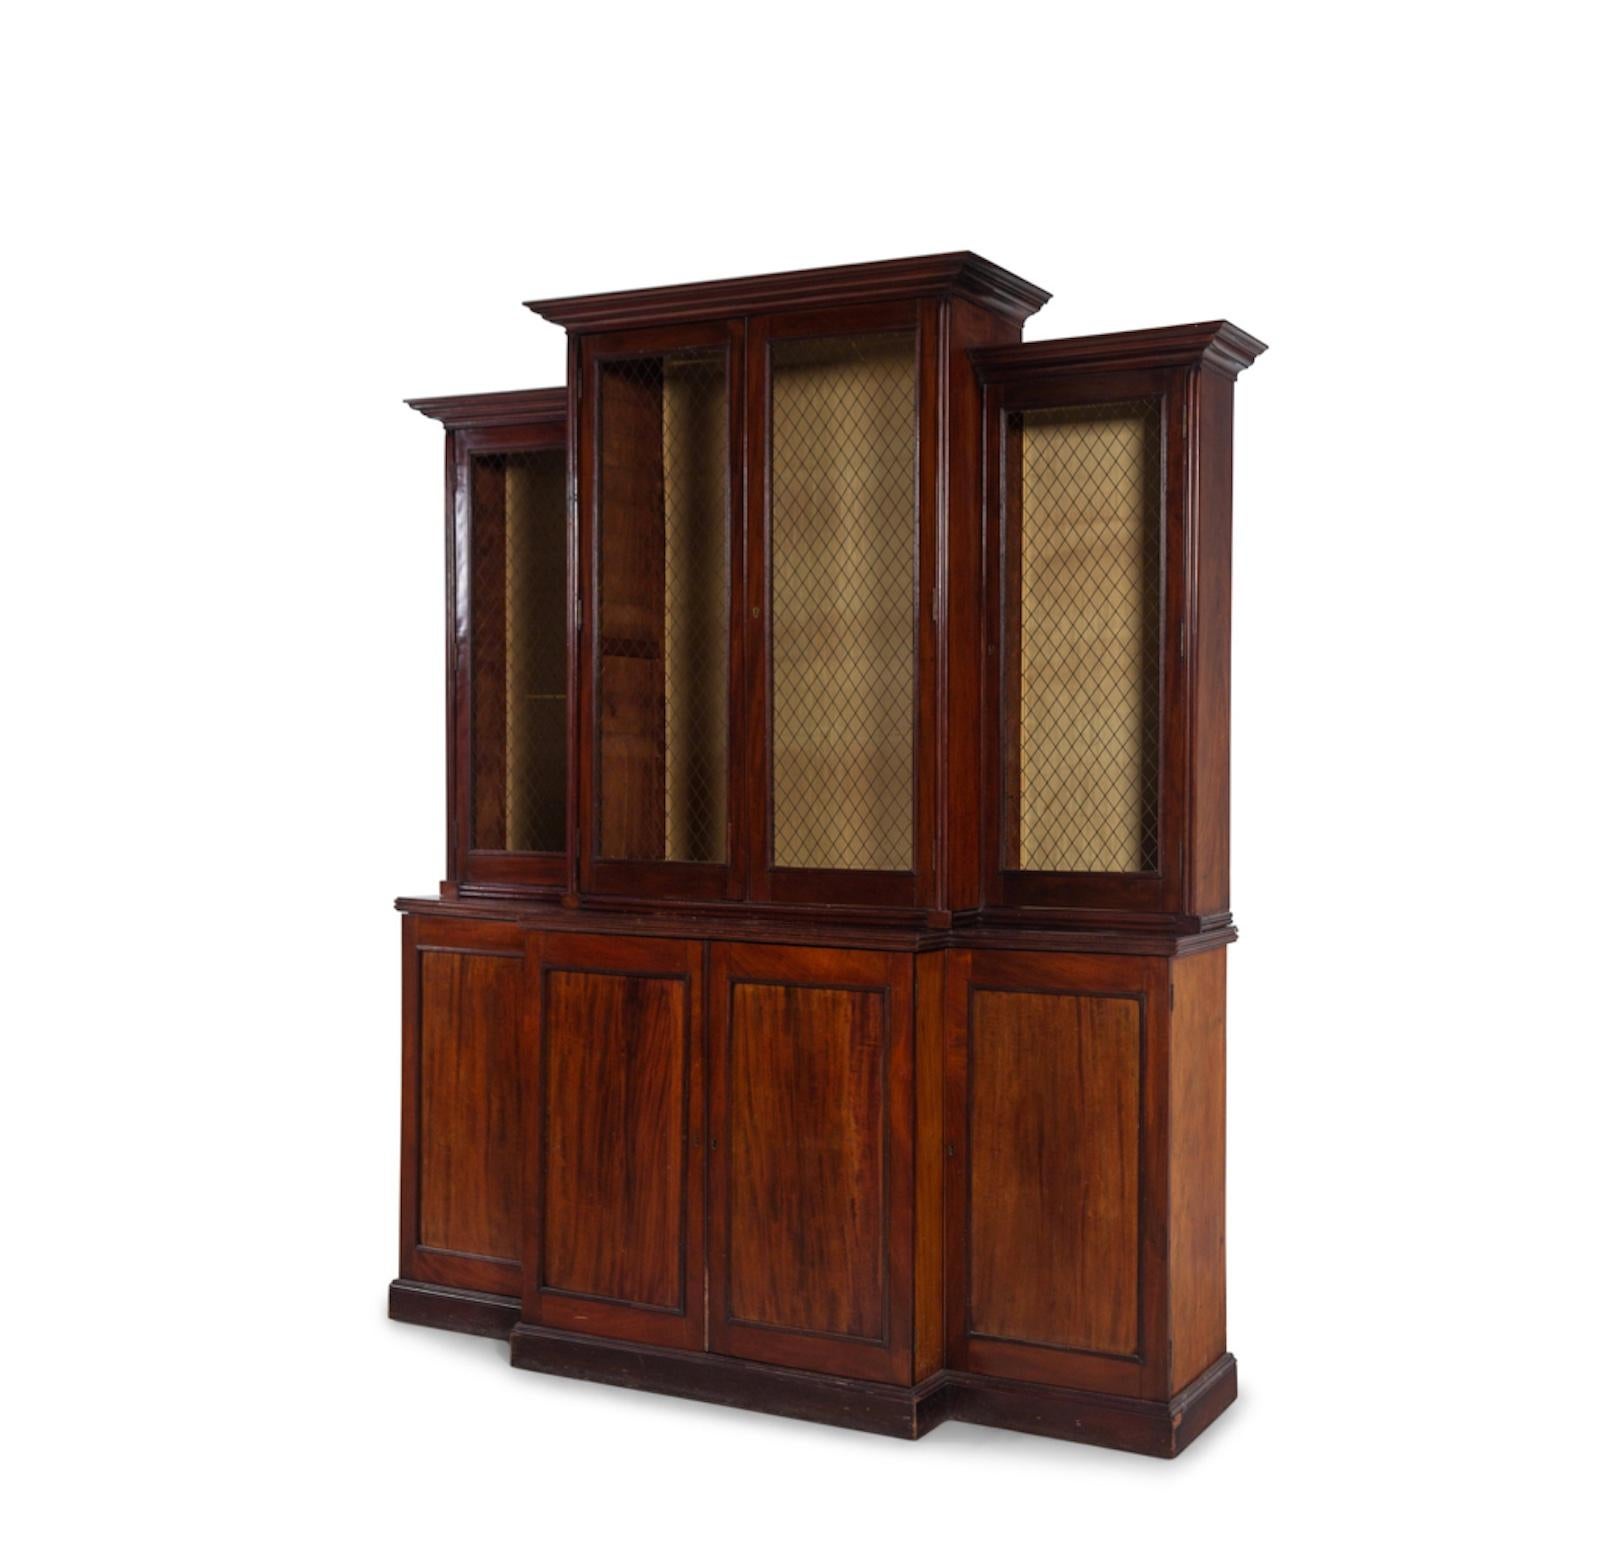 A Regency Mahogany Breakfront Bookcase
19th Century, Grilled Upper Doors With Lower Doors Concealing Shelves.  Nice Color And Patination.
Height 89 x width 77 x depth 21 inches.